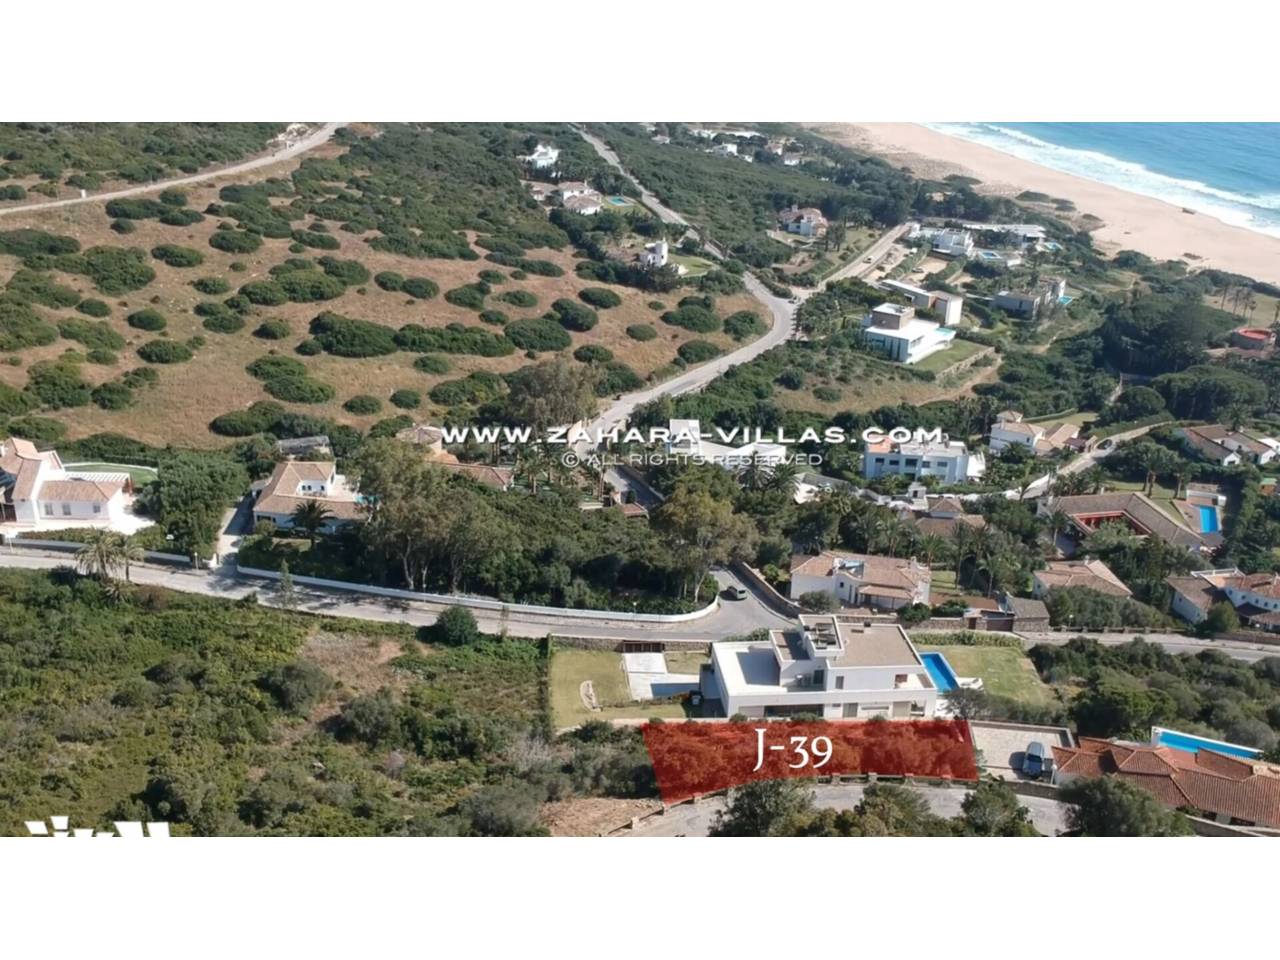 Imagen 1 de Exclusive plot with unbeatable views of Africa and the Camarinal Lighthouse OPPORTUNITY!